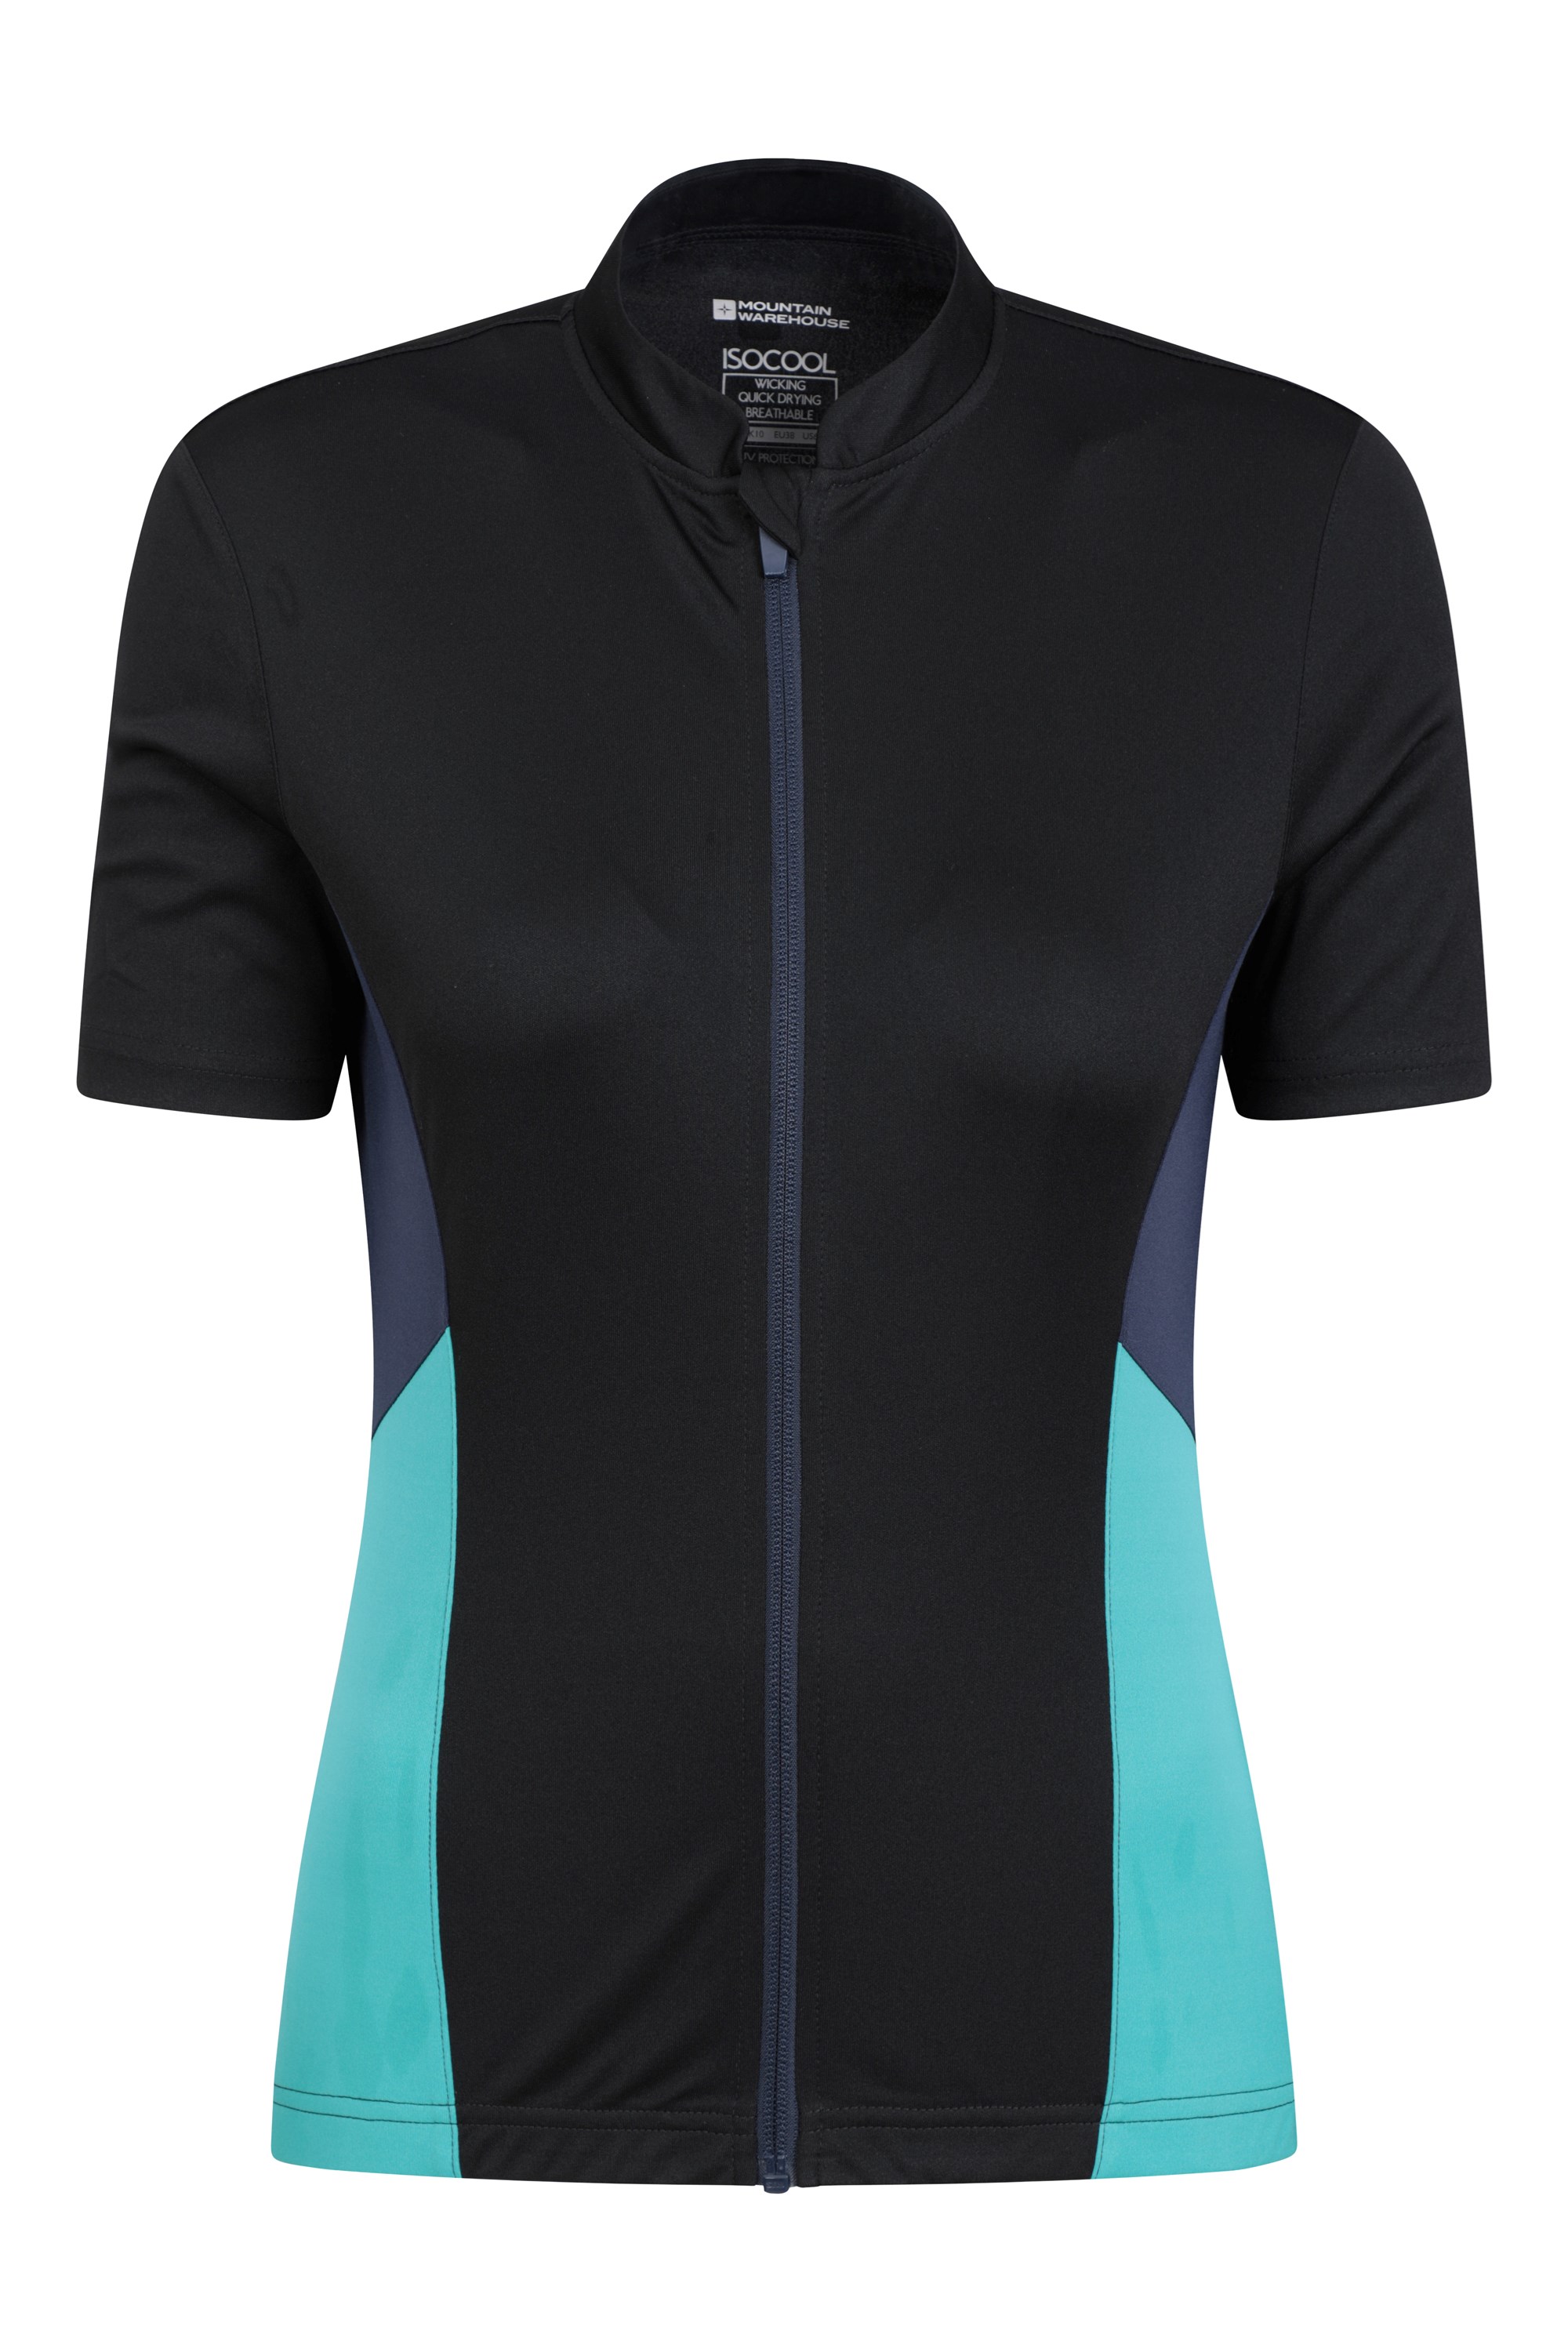 Energize Womens Cycle T-shirt - Navy